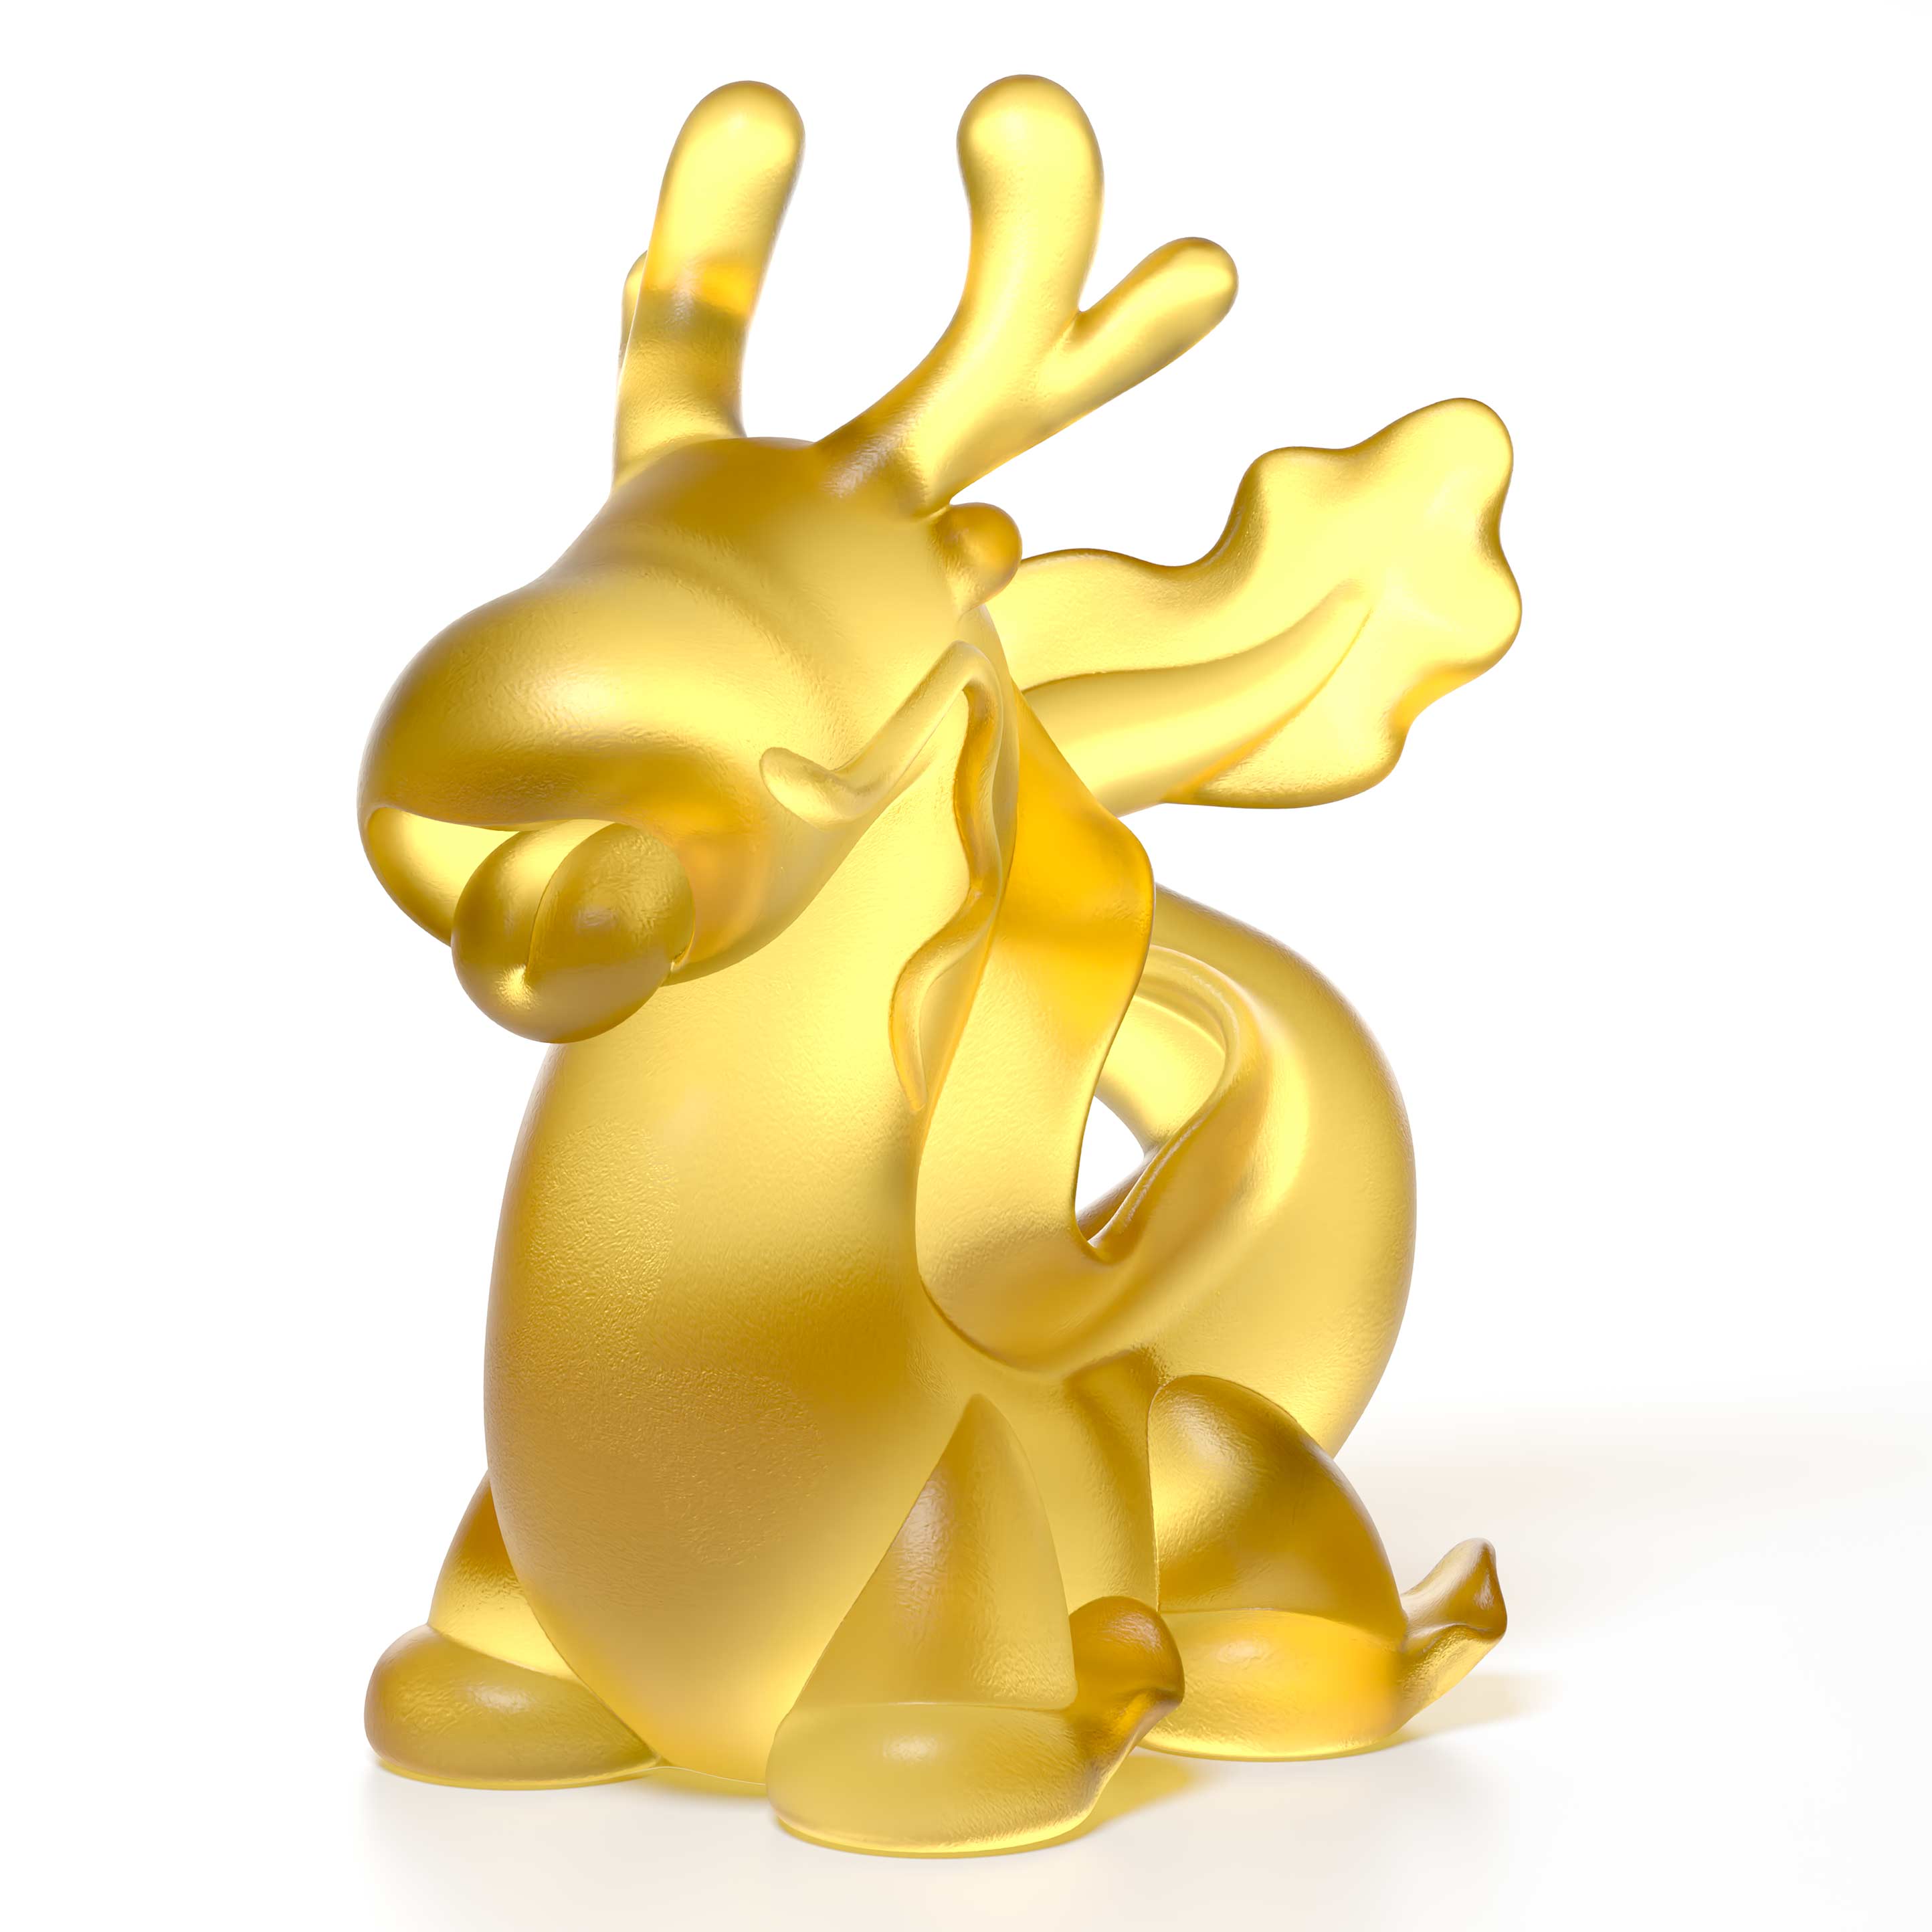 Dragon's Breath yellow crystal sculpture the size is  16 cm height, by Ferdi B Dick,  Limited edition of 50 45 degree view